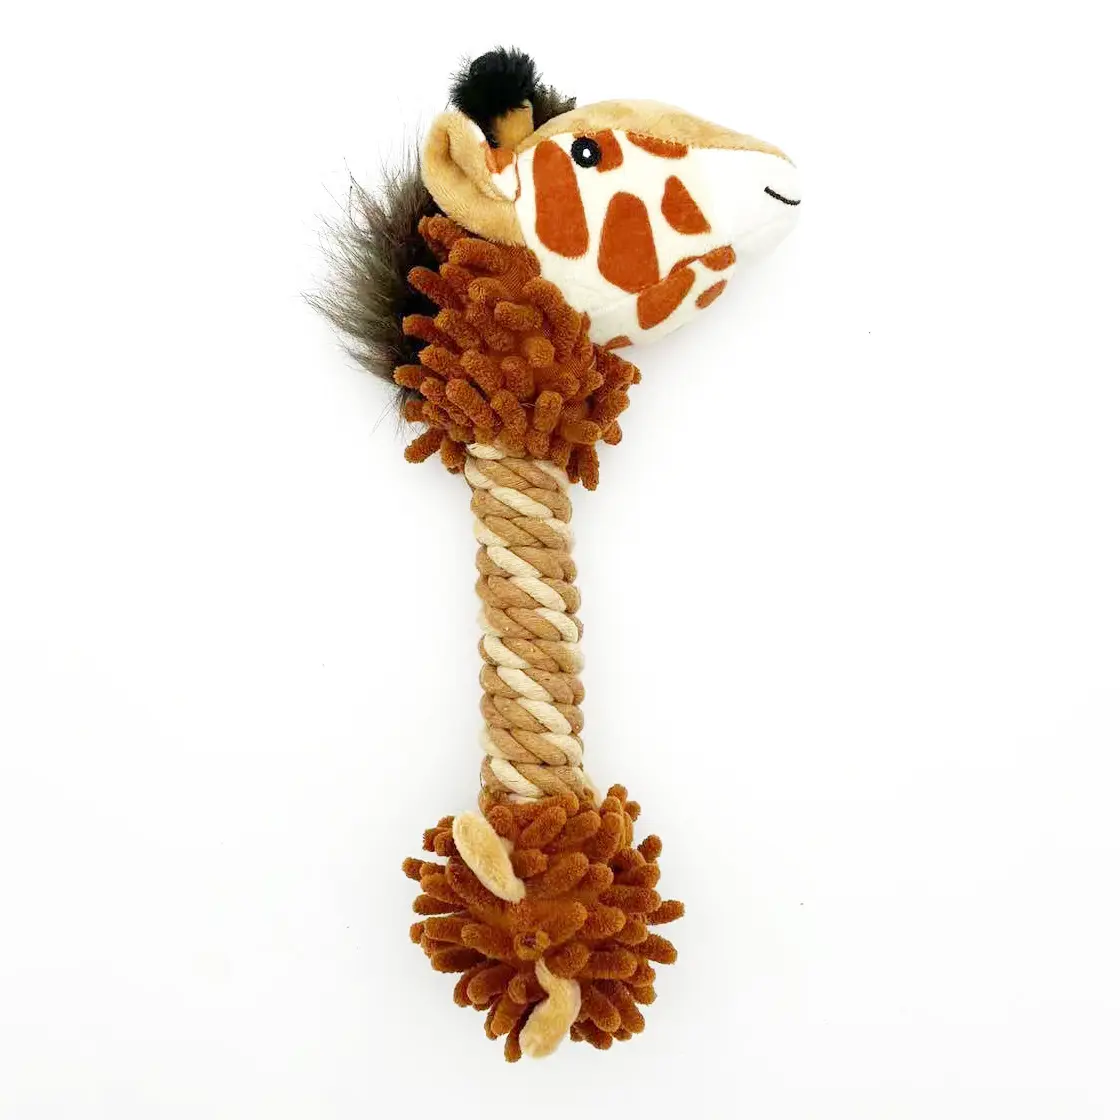 New released animal giraffe shape plush cotton rope dog toy sound chew interactive cleaning teeth